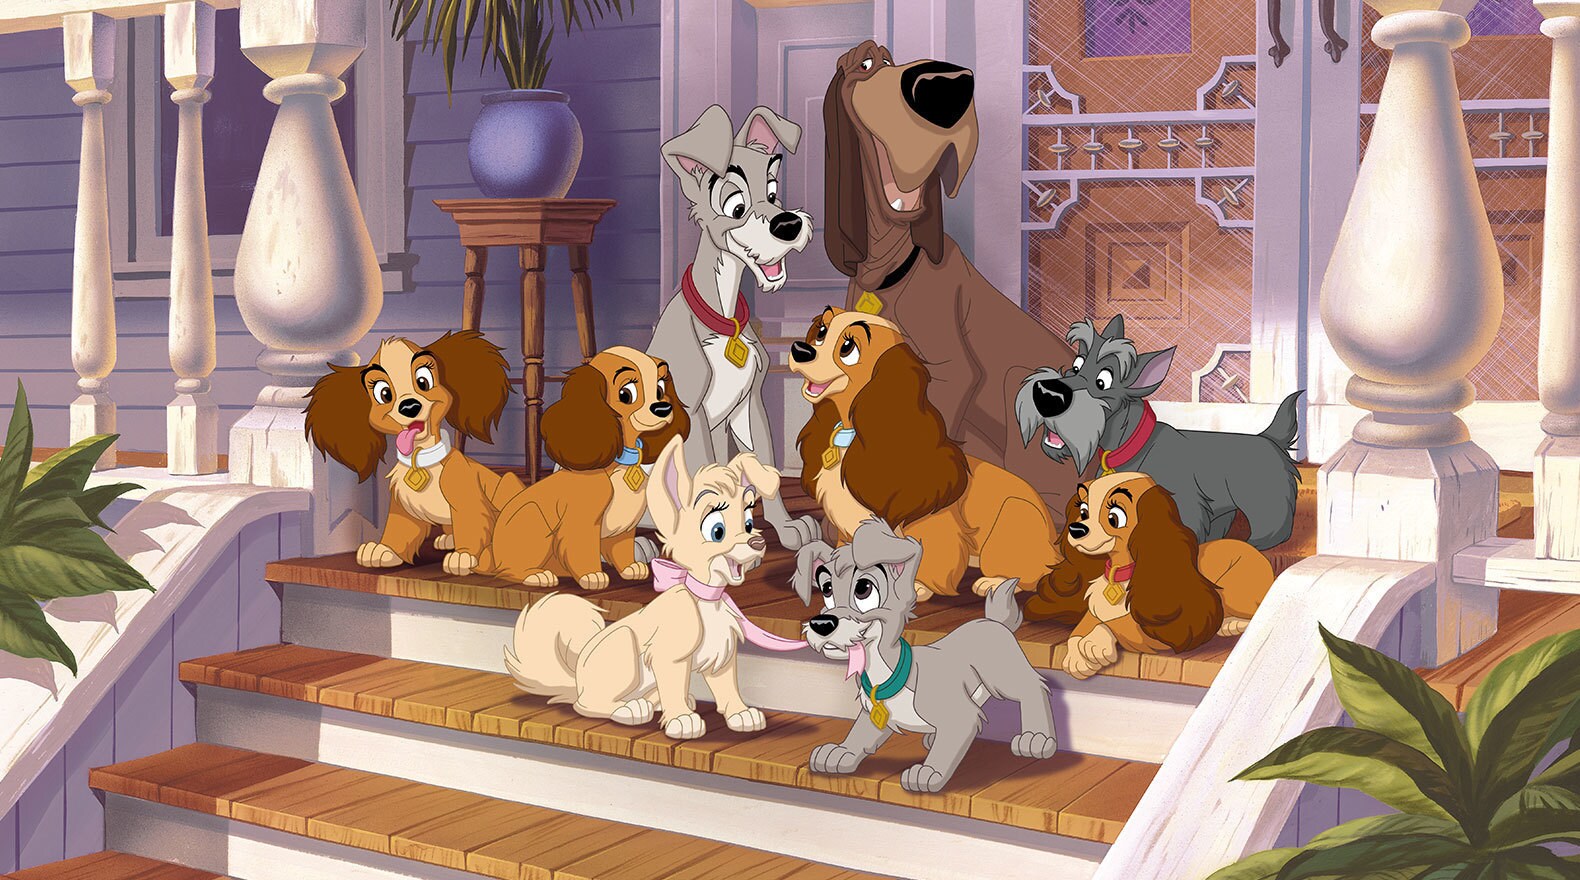 Lady, Tramp, Angel, Scamp, Annette, Danielle, and Collette with Trusty and Jock (dogs)